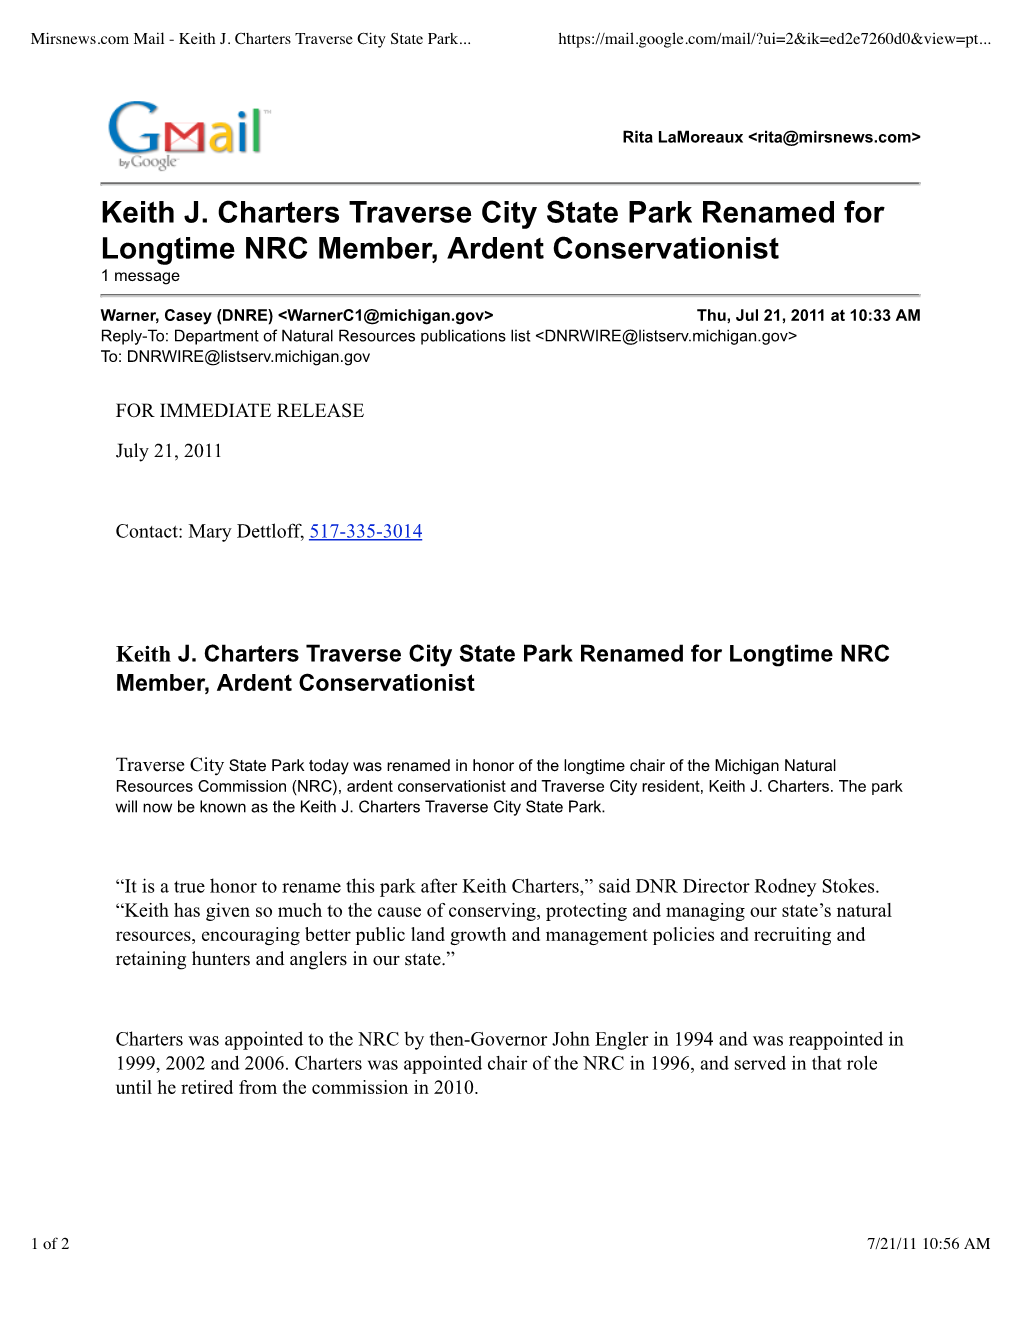 Keith J. Charters Traverse City State Park Renamed for Longtime NRC Member, Ardent Conservationist 1 Message